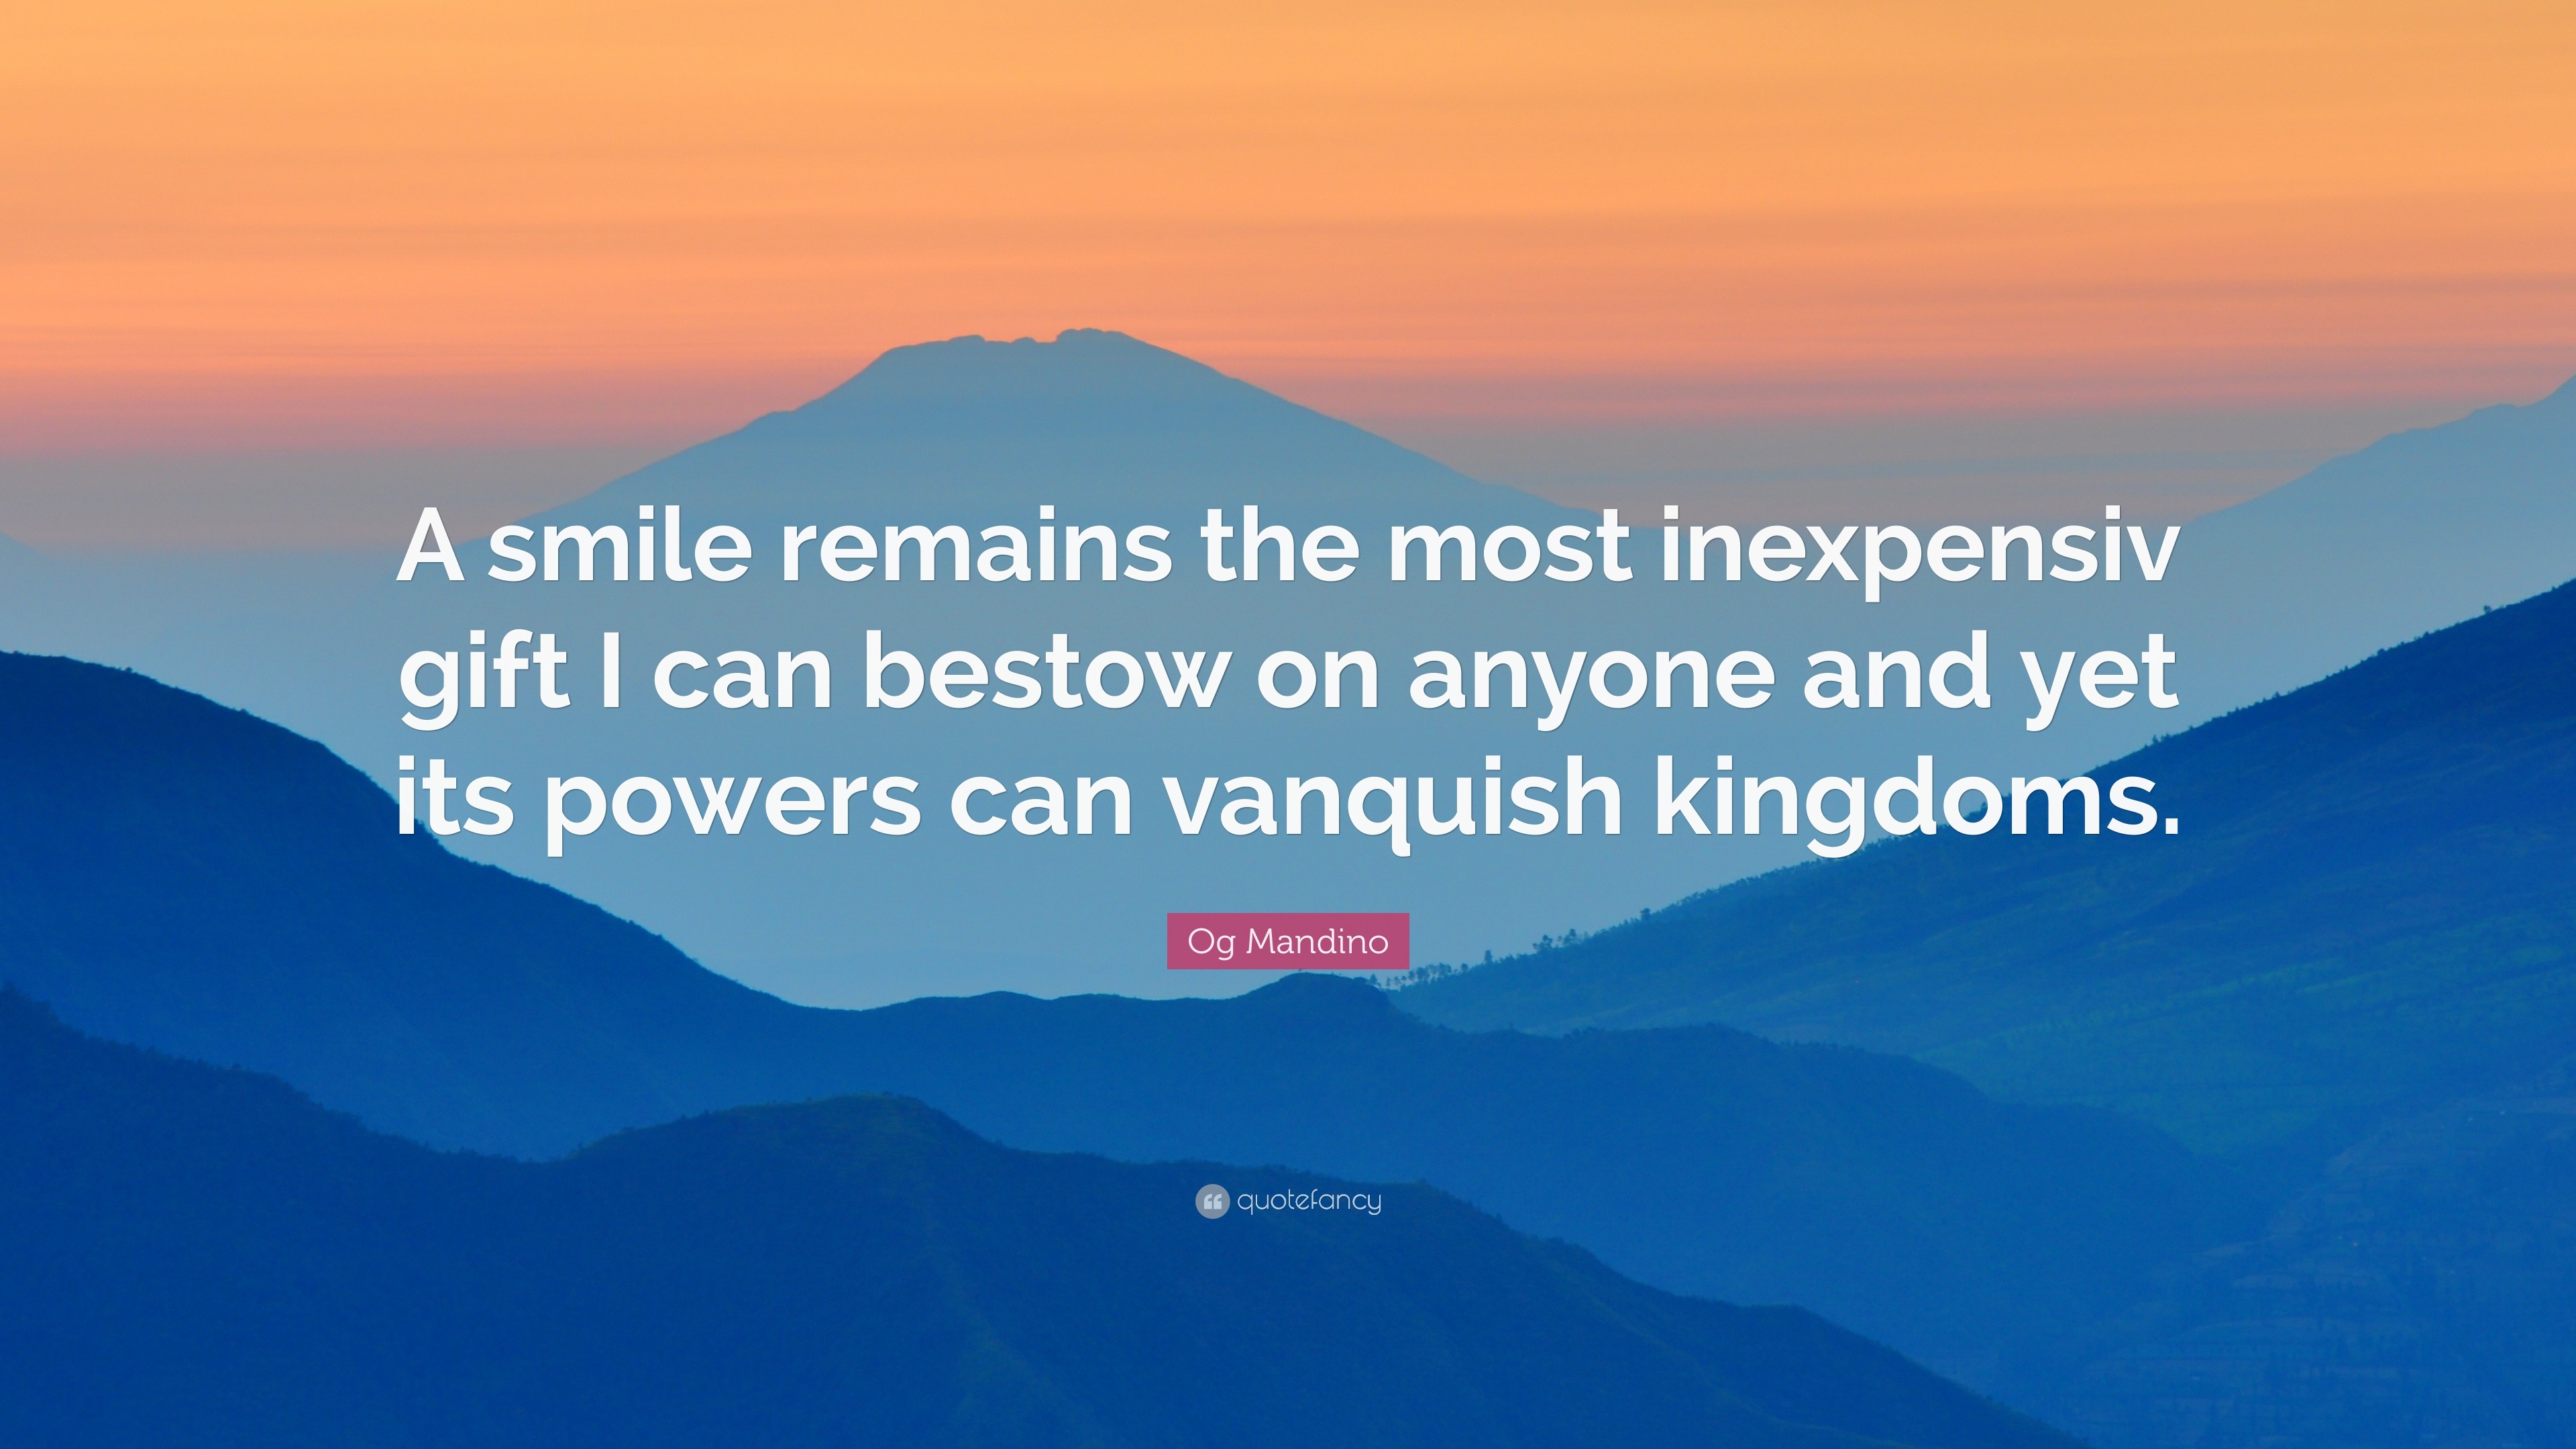 Og Mandino Quote A smile remains the most inexpensiv gift I can bestow